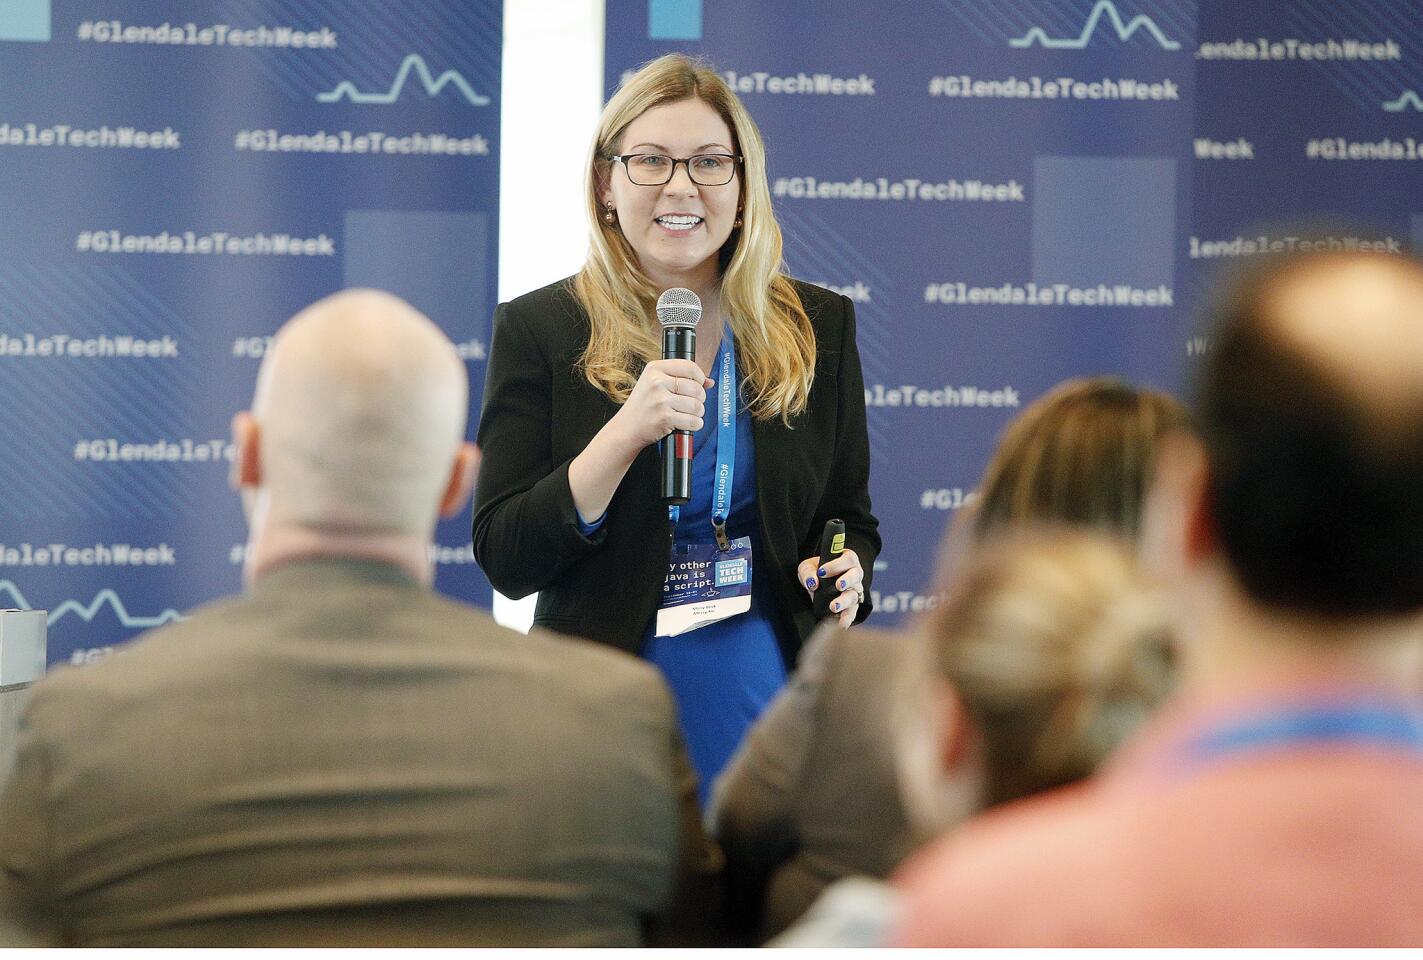 Molly Beck, of Messy.fm, pitches a line of judges about her company for PitchFest, part of Glendale's 2018 Tech Week at CBRE in Glendale on Thursday, September 20, 2018. PitchFest is a Shark Tank-like opportunity for companies to pitch their business ideas to a panel, with the hopes of taking home a $60,000 prize.